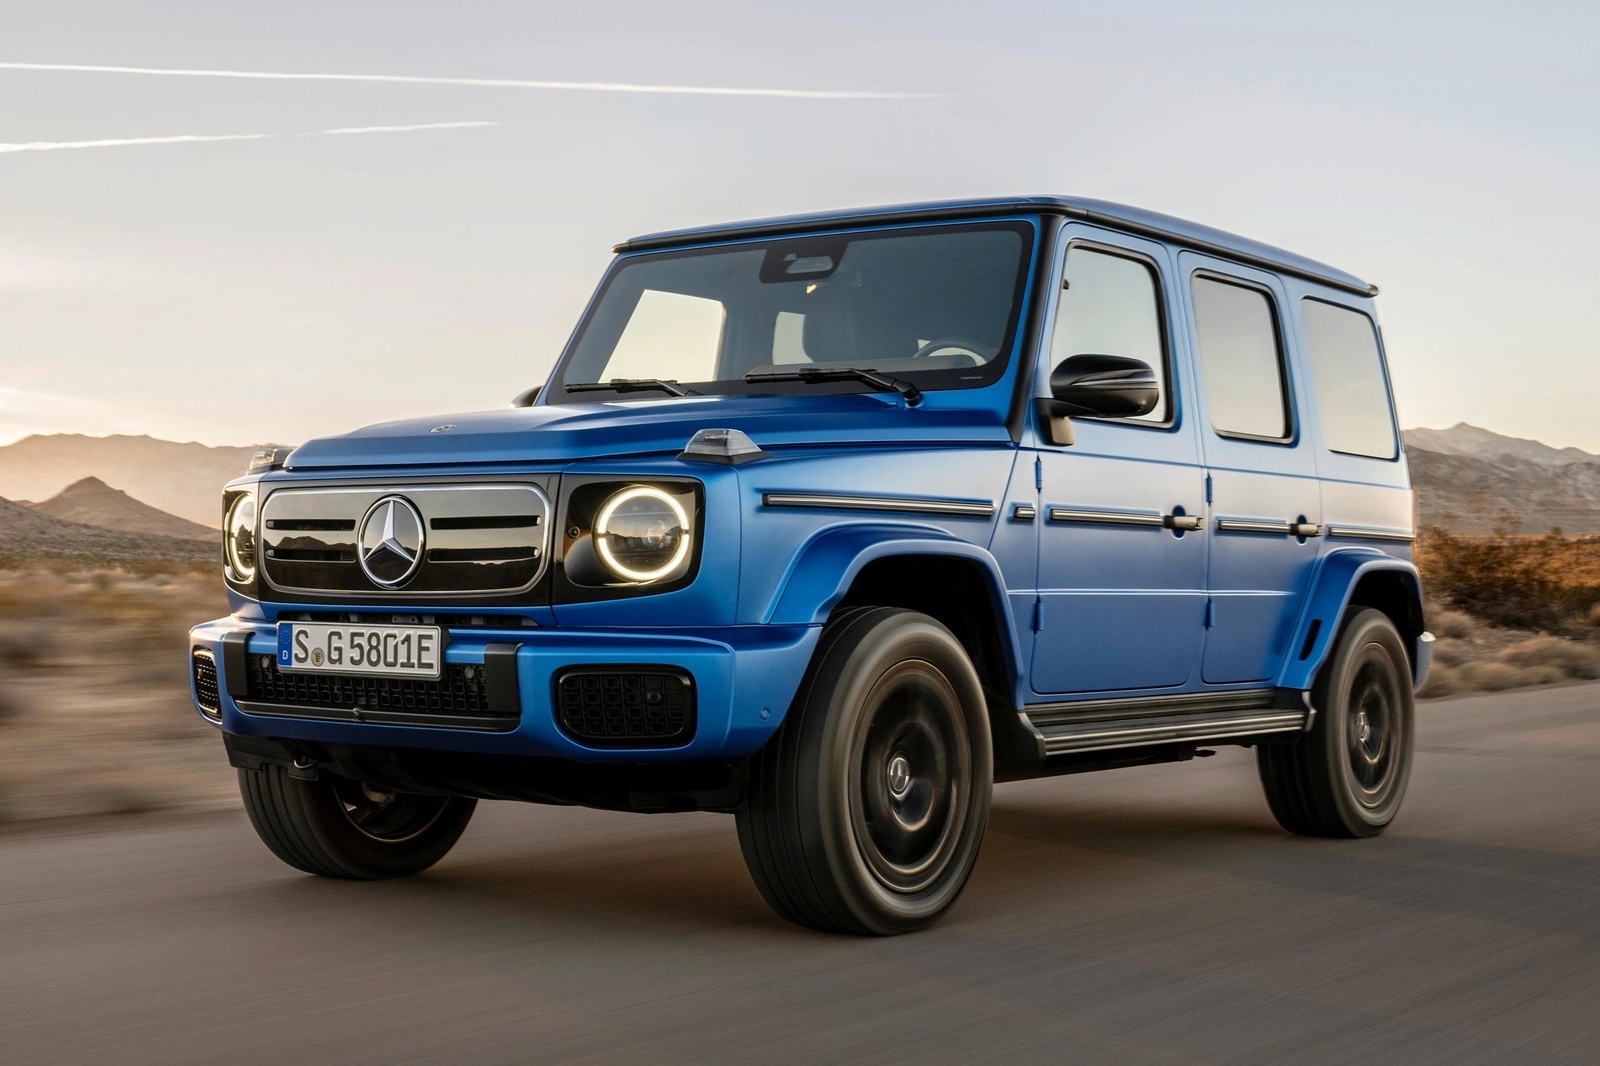 Chi tiết chiếc xe điện Mercedes-Benz G 580 Edition One